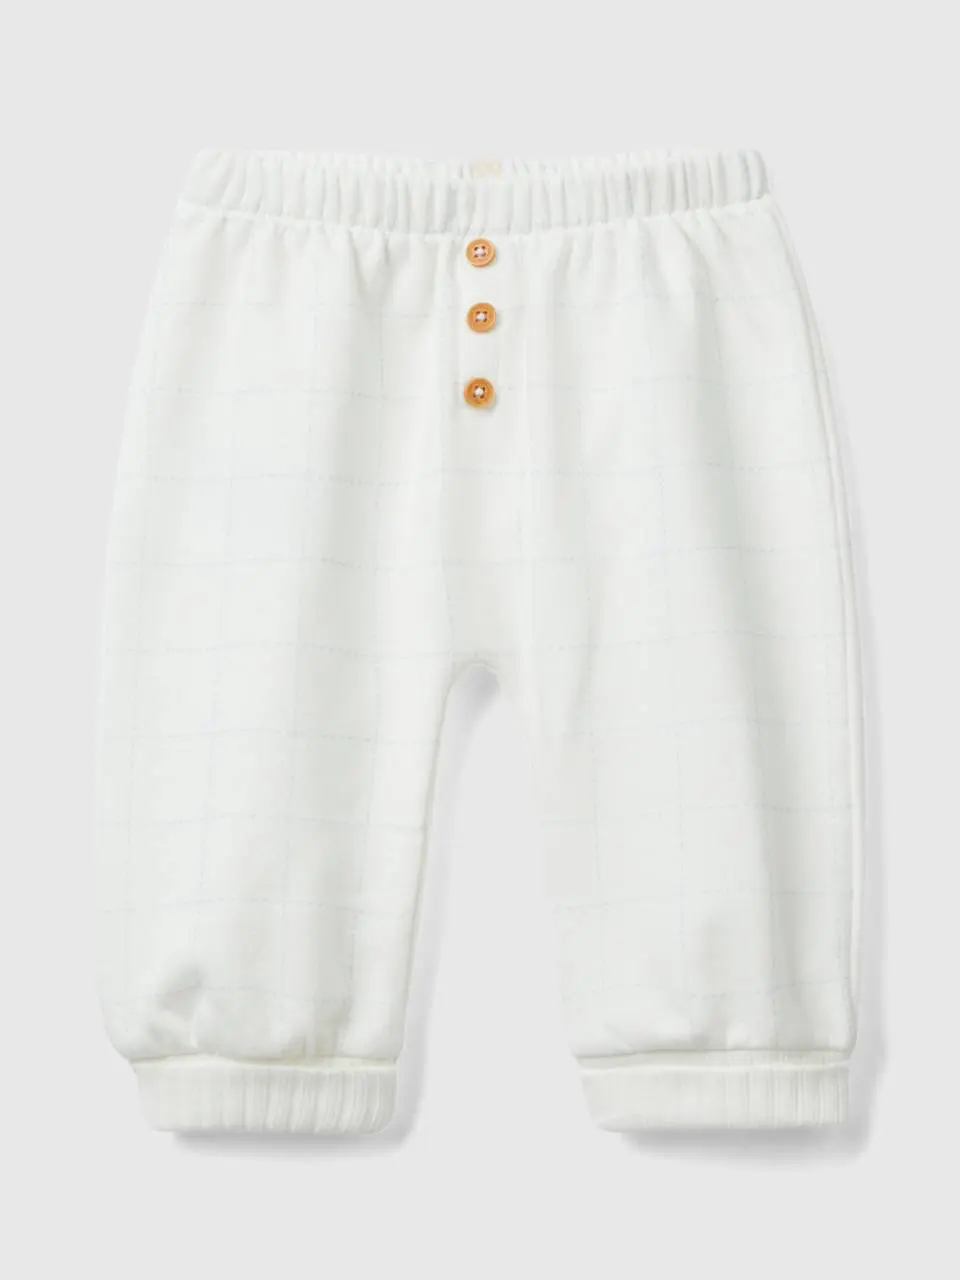 Benetton sweatpants with buttons. 1